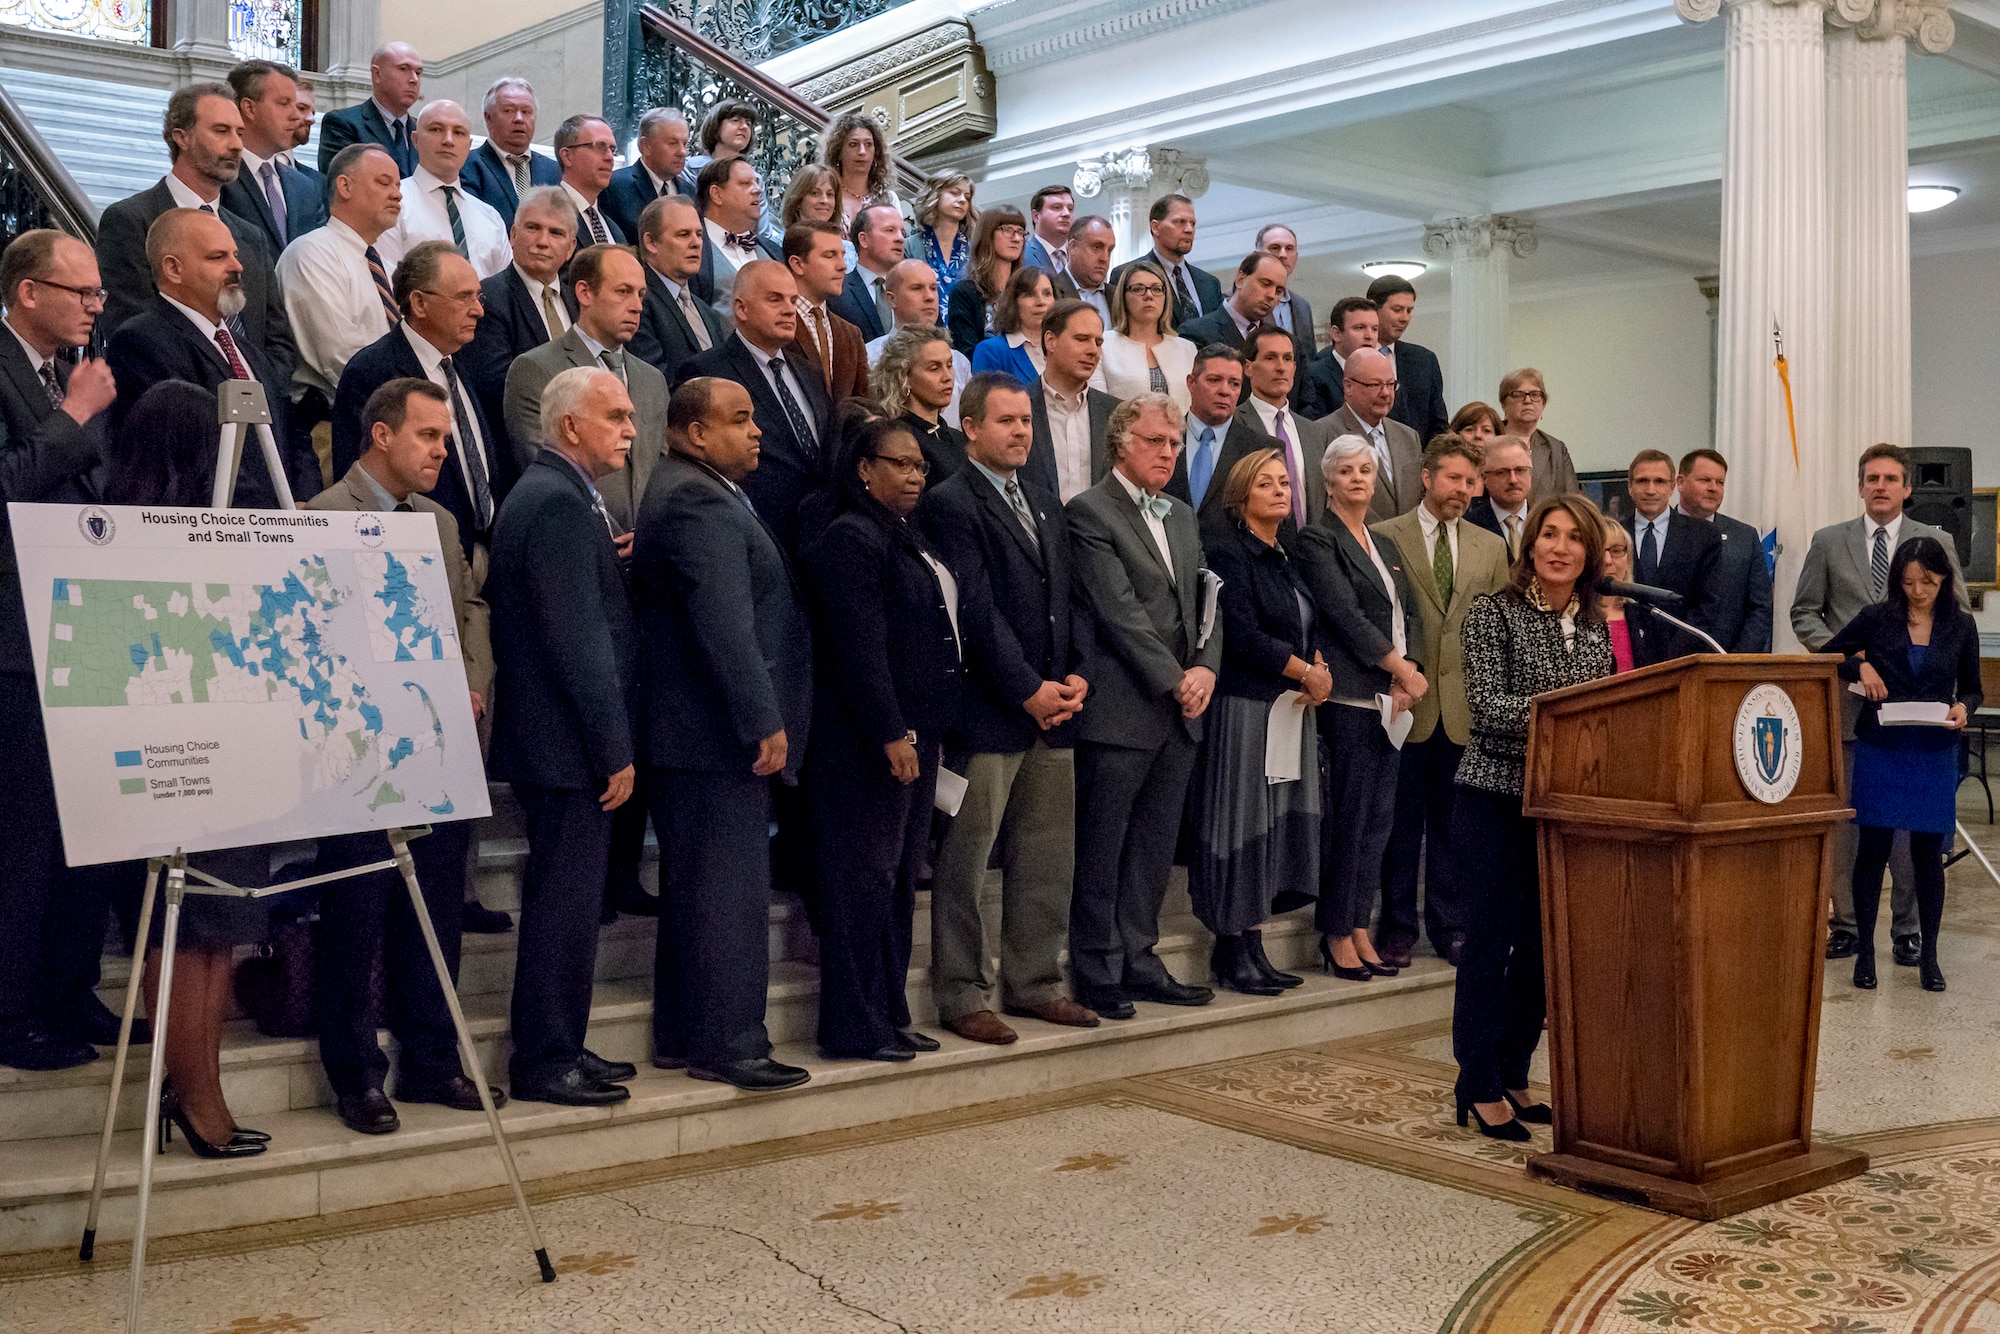 Lt. Governor Karyn Polito was joined by municipal officials and legislators to announce the 2018 Housing Choice Community designees.